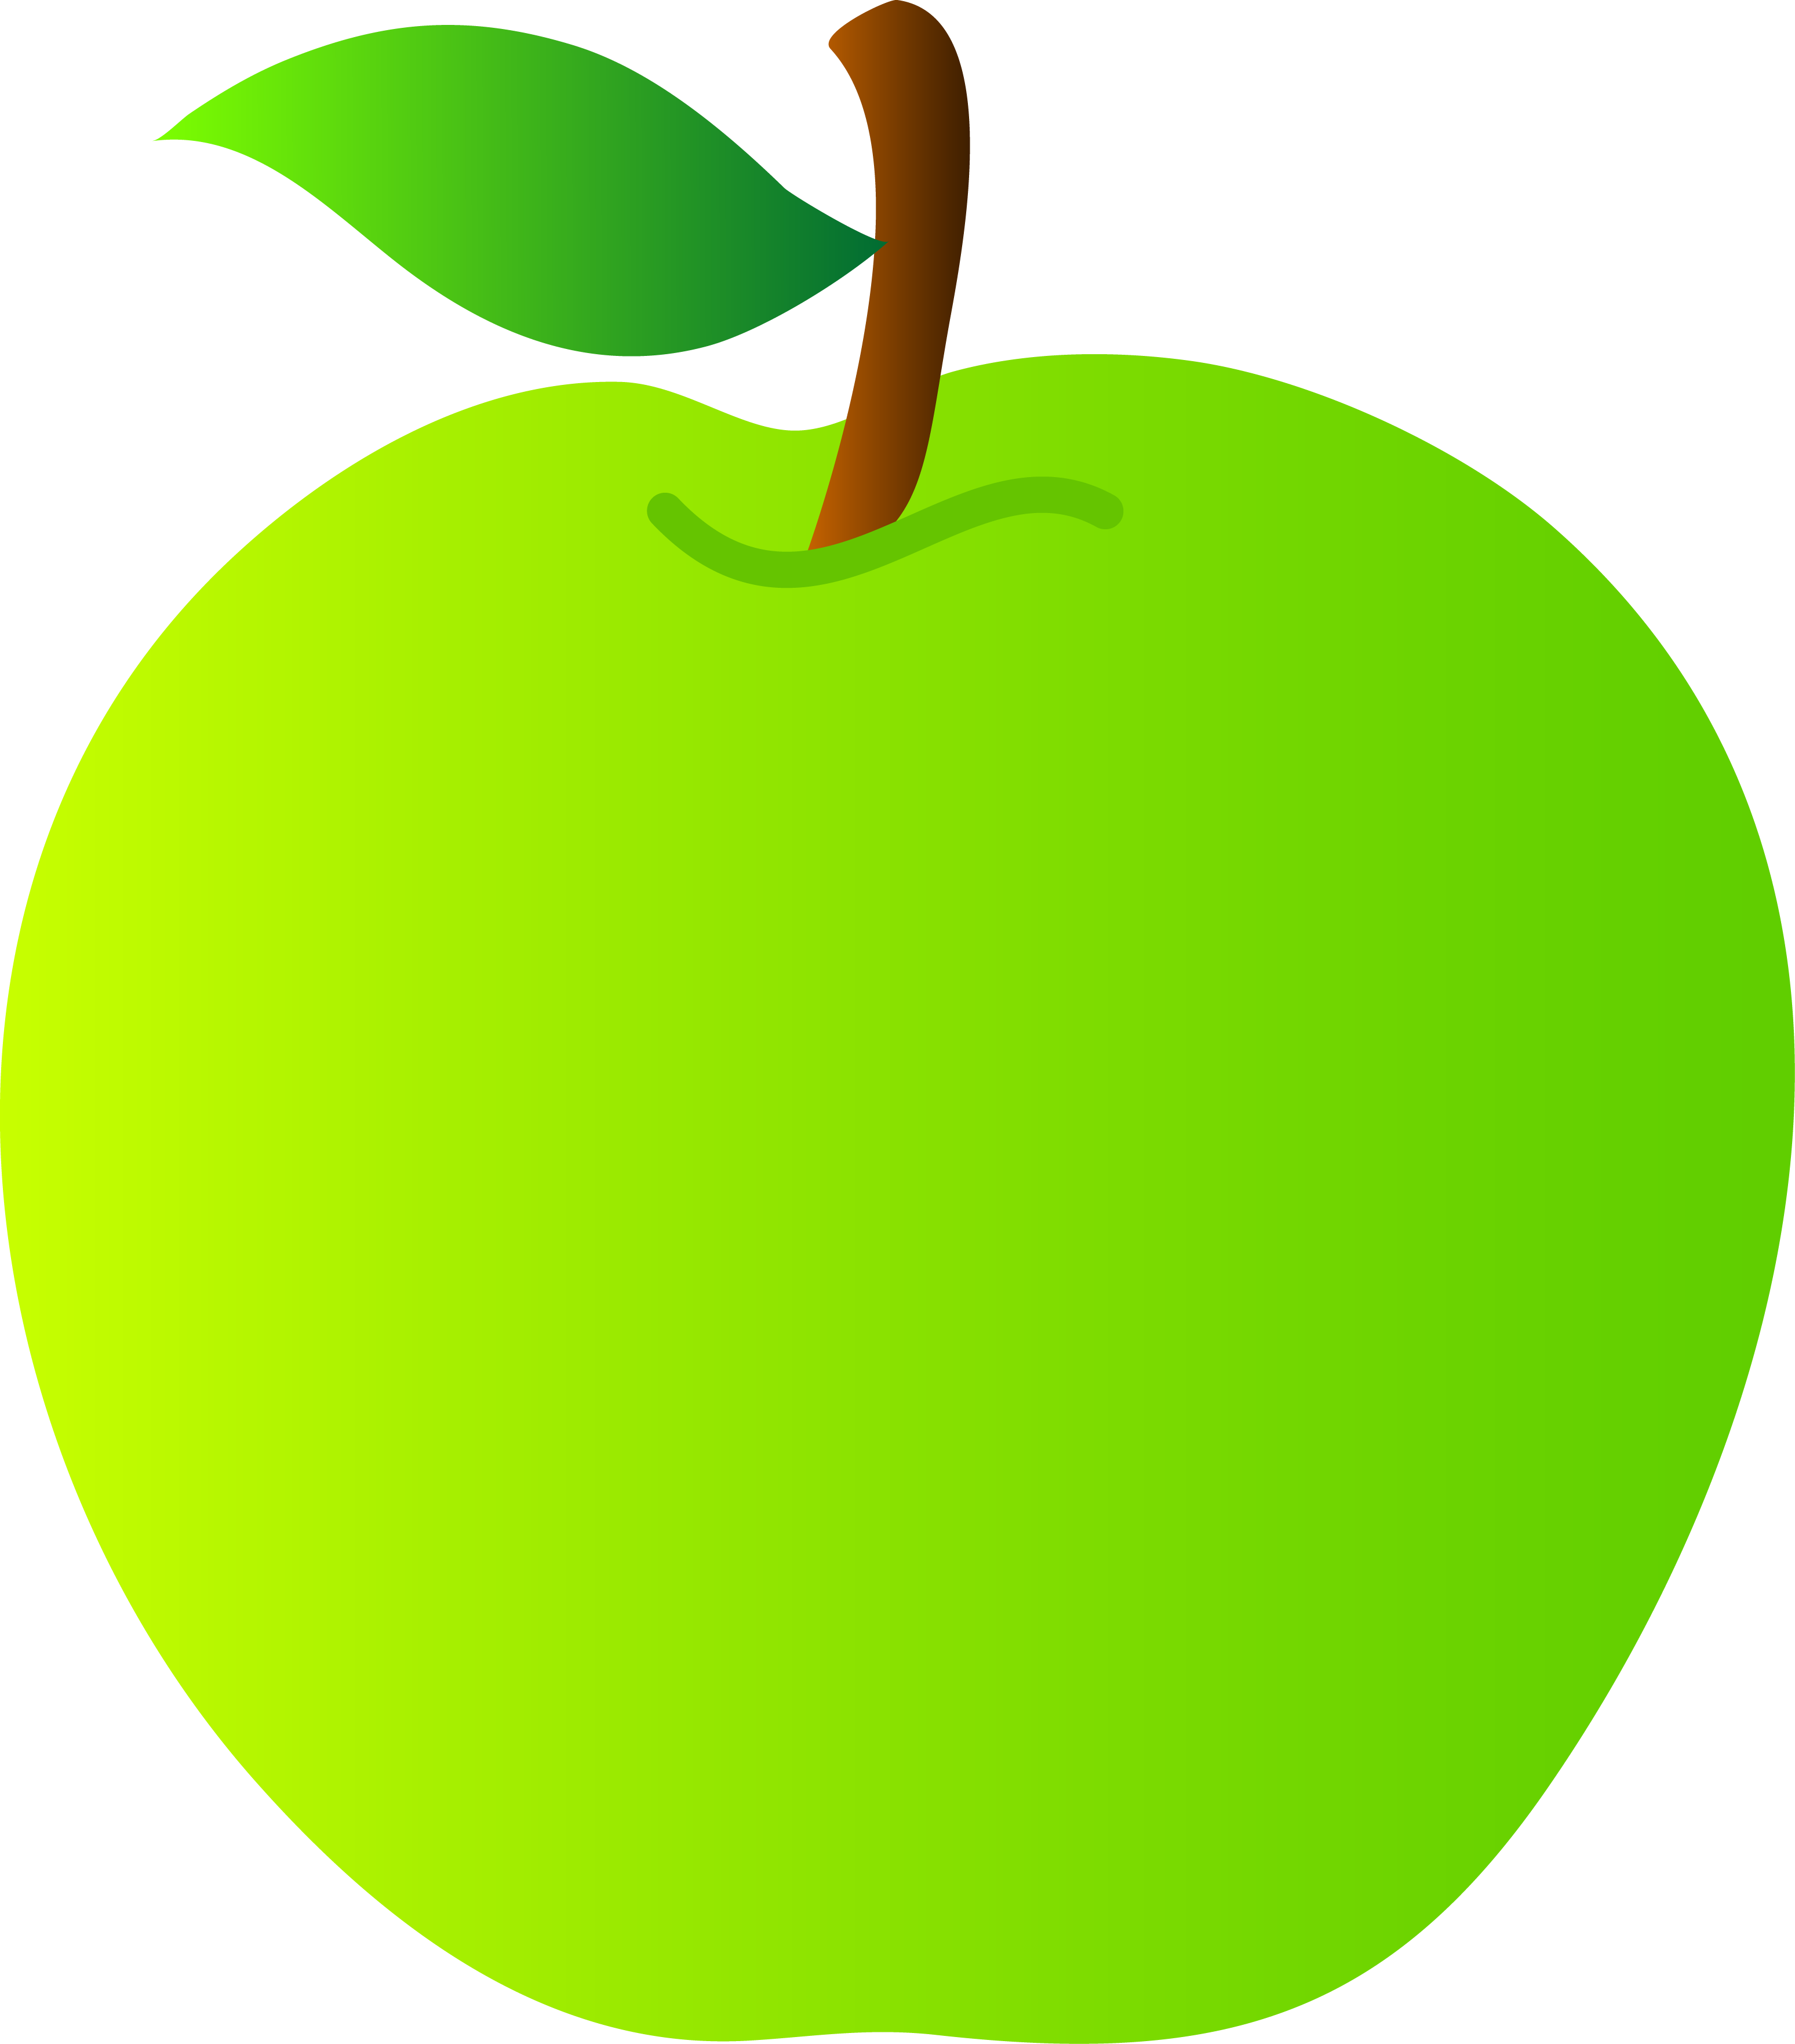 green apple clipart free images